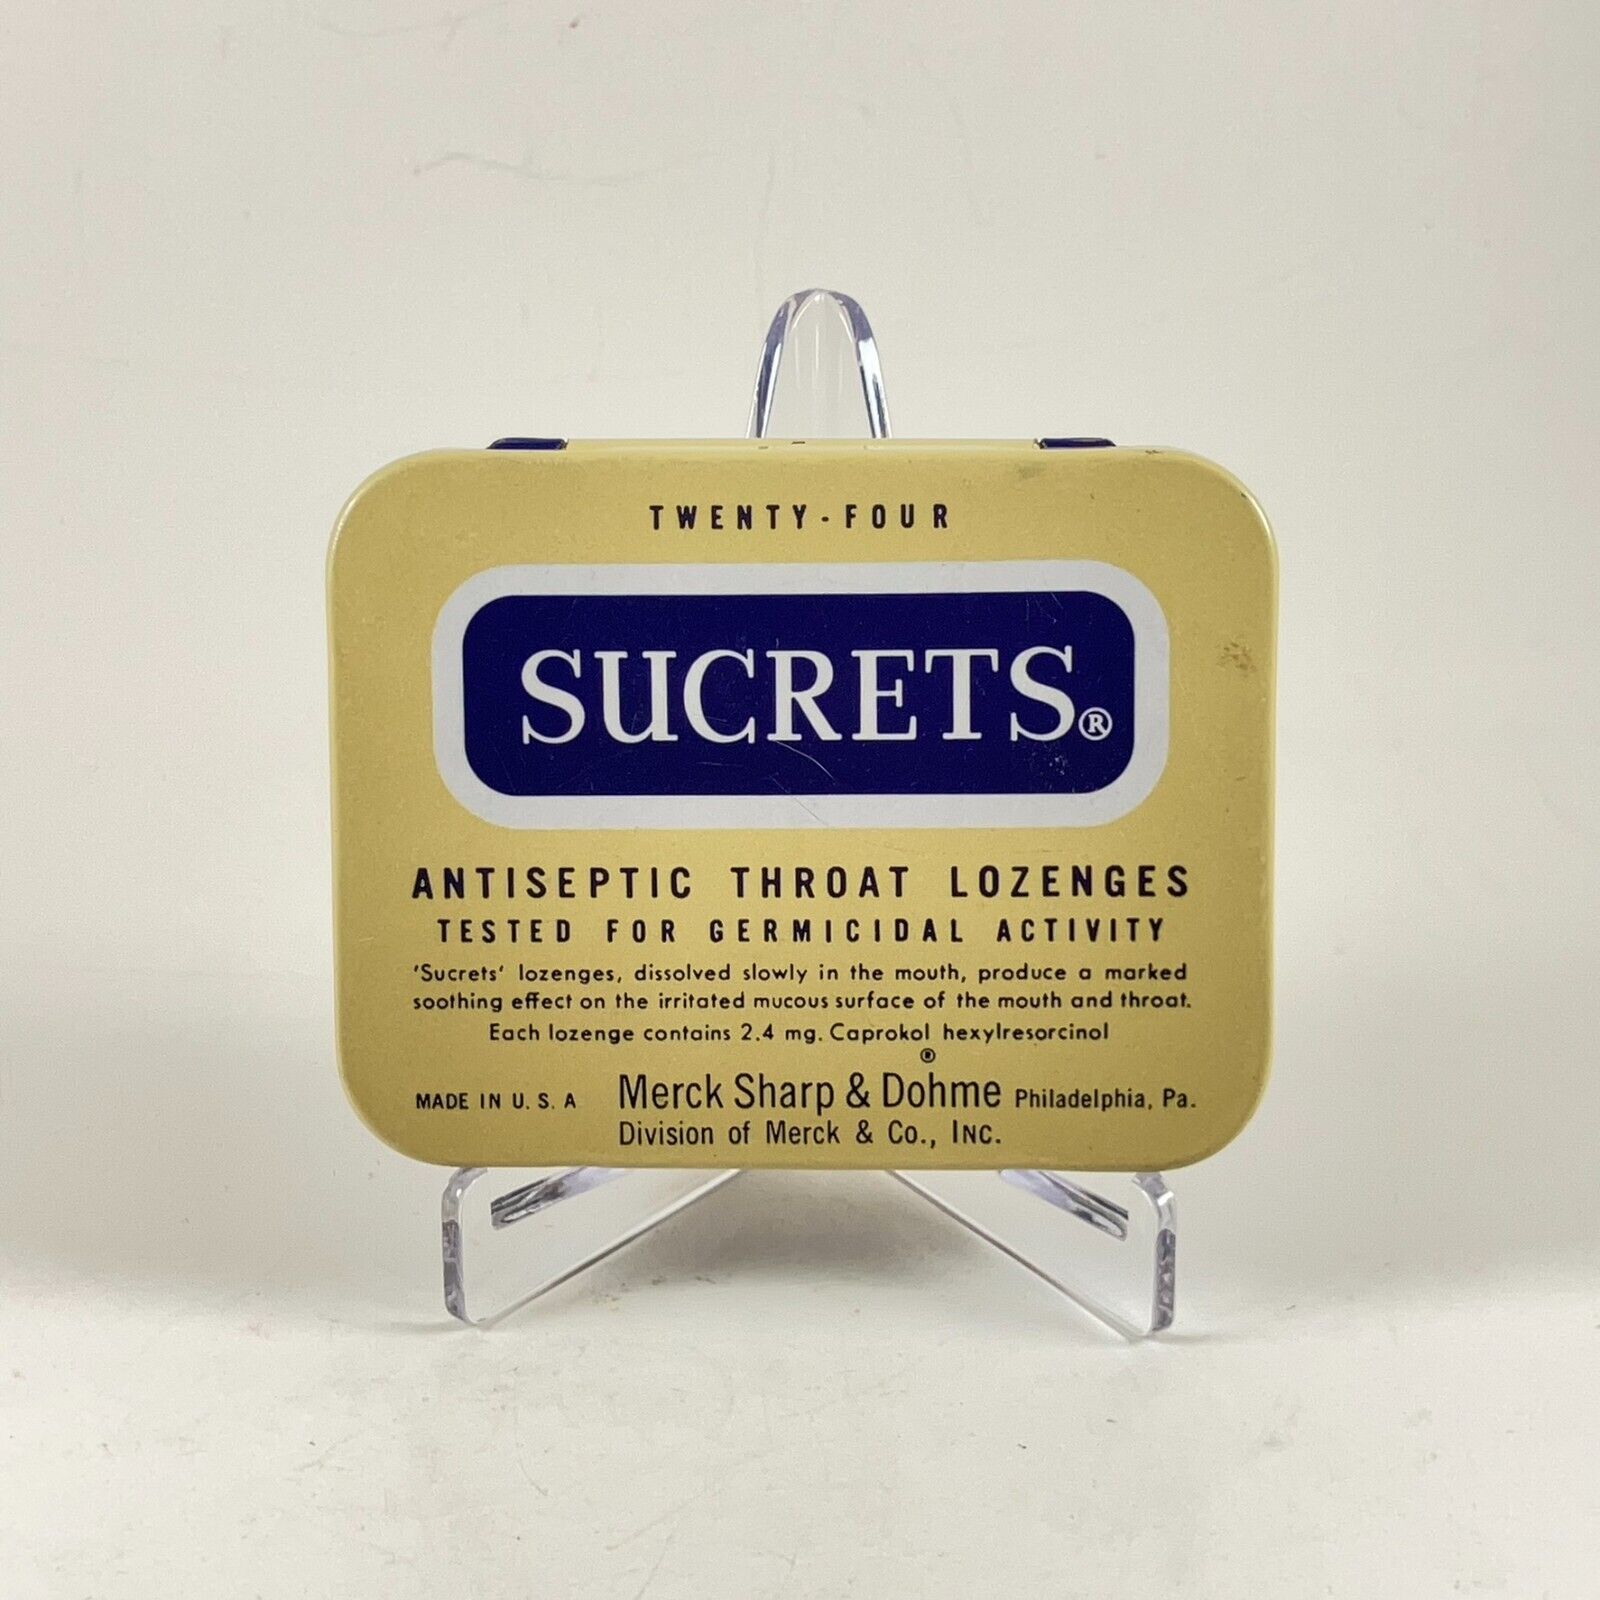 Vintage Sucrets Throat Lozenges Tin - MSD 24 Tabs, Empty, Collector's Item